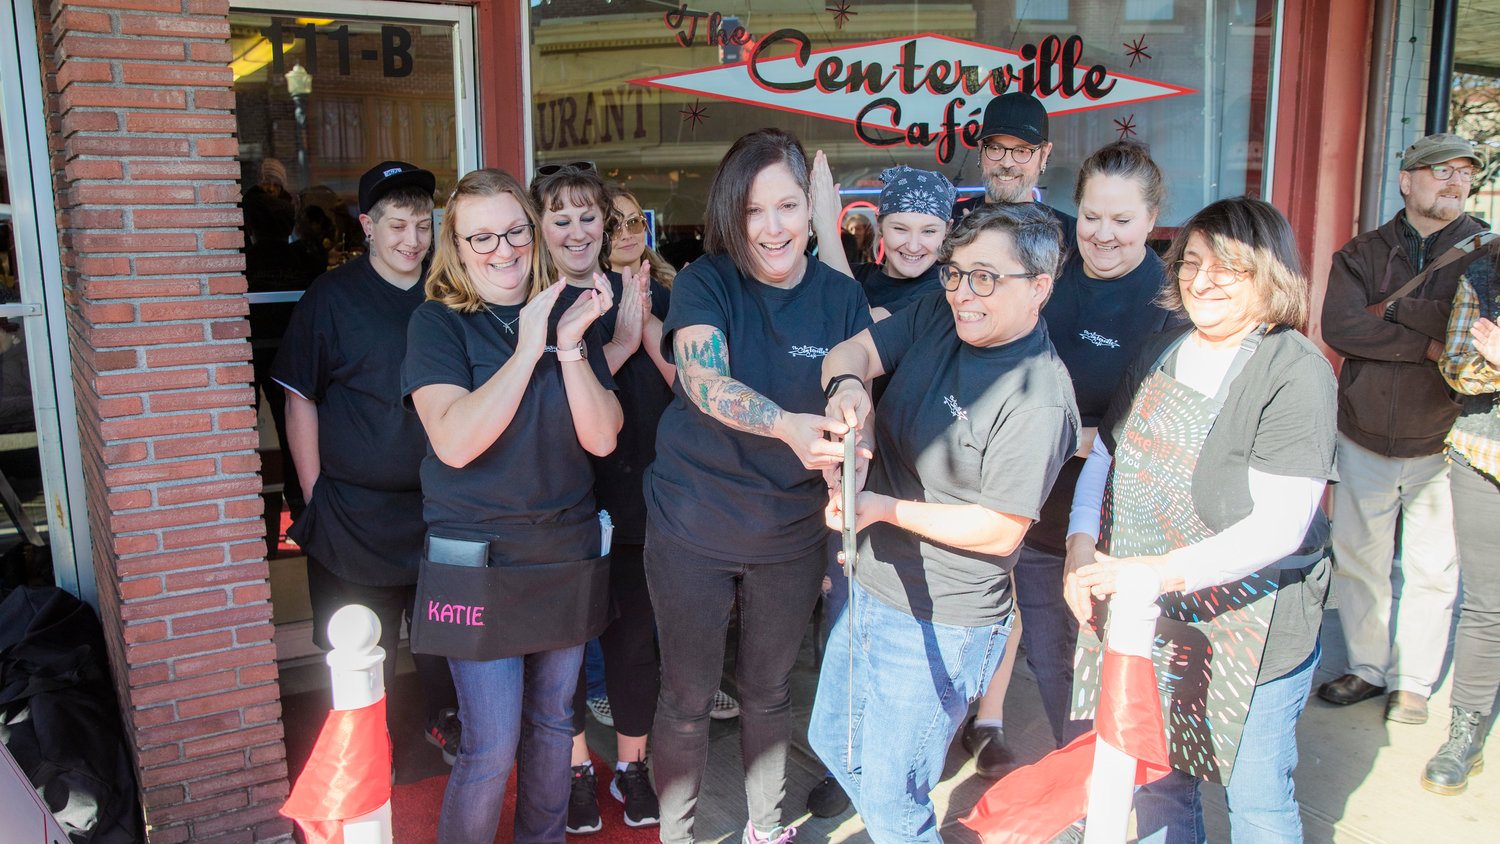 Lisa and Michelle Little smile as a ribbon is cut outside The Centerville Cafe in Centralia on Wednesday during an event hosted by the Centralia-Chehalis Chamber of Commerce. The Centerville Cafe reopened Jan. 5 with new owners Michelle and Lisa Little in downtown Centralia. The cafe is located at 111 N. Tower Ave. in Centralia. Both Michelle and Lisa Little grew up in the area and have been going to The Centerville Cafe for over 20 years. Before being approached by the previous owners, Marion Manzer and Morris Gall, about purchasing the restaurant, Michelle Little managed a restaurant in Olympia, and Lisa Little worked as a nurse. Manzer and Gall wanted the restaurant to stay family owned to maintain the spirit of The Centerville Cafe in Centralia. According to the chamber, the cafe got its name in 2013 when Manzer and Gall bought what had been called the “Jersey Diner” and renamed it after the original name of Centralia, which was Centerville. The Centerville Cafe — under various names — is more than 120 years old.
“We focus on having really good food, cooked with love. We want it to feel like home when you come in. Our staff really makes this place amazing,” Michelle Little said.